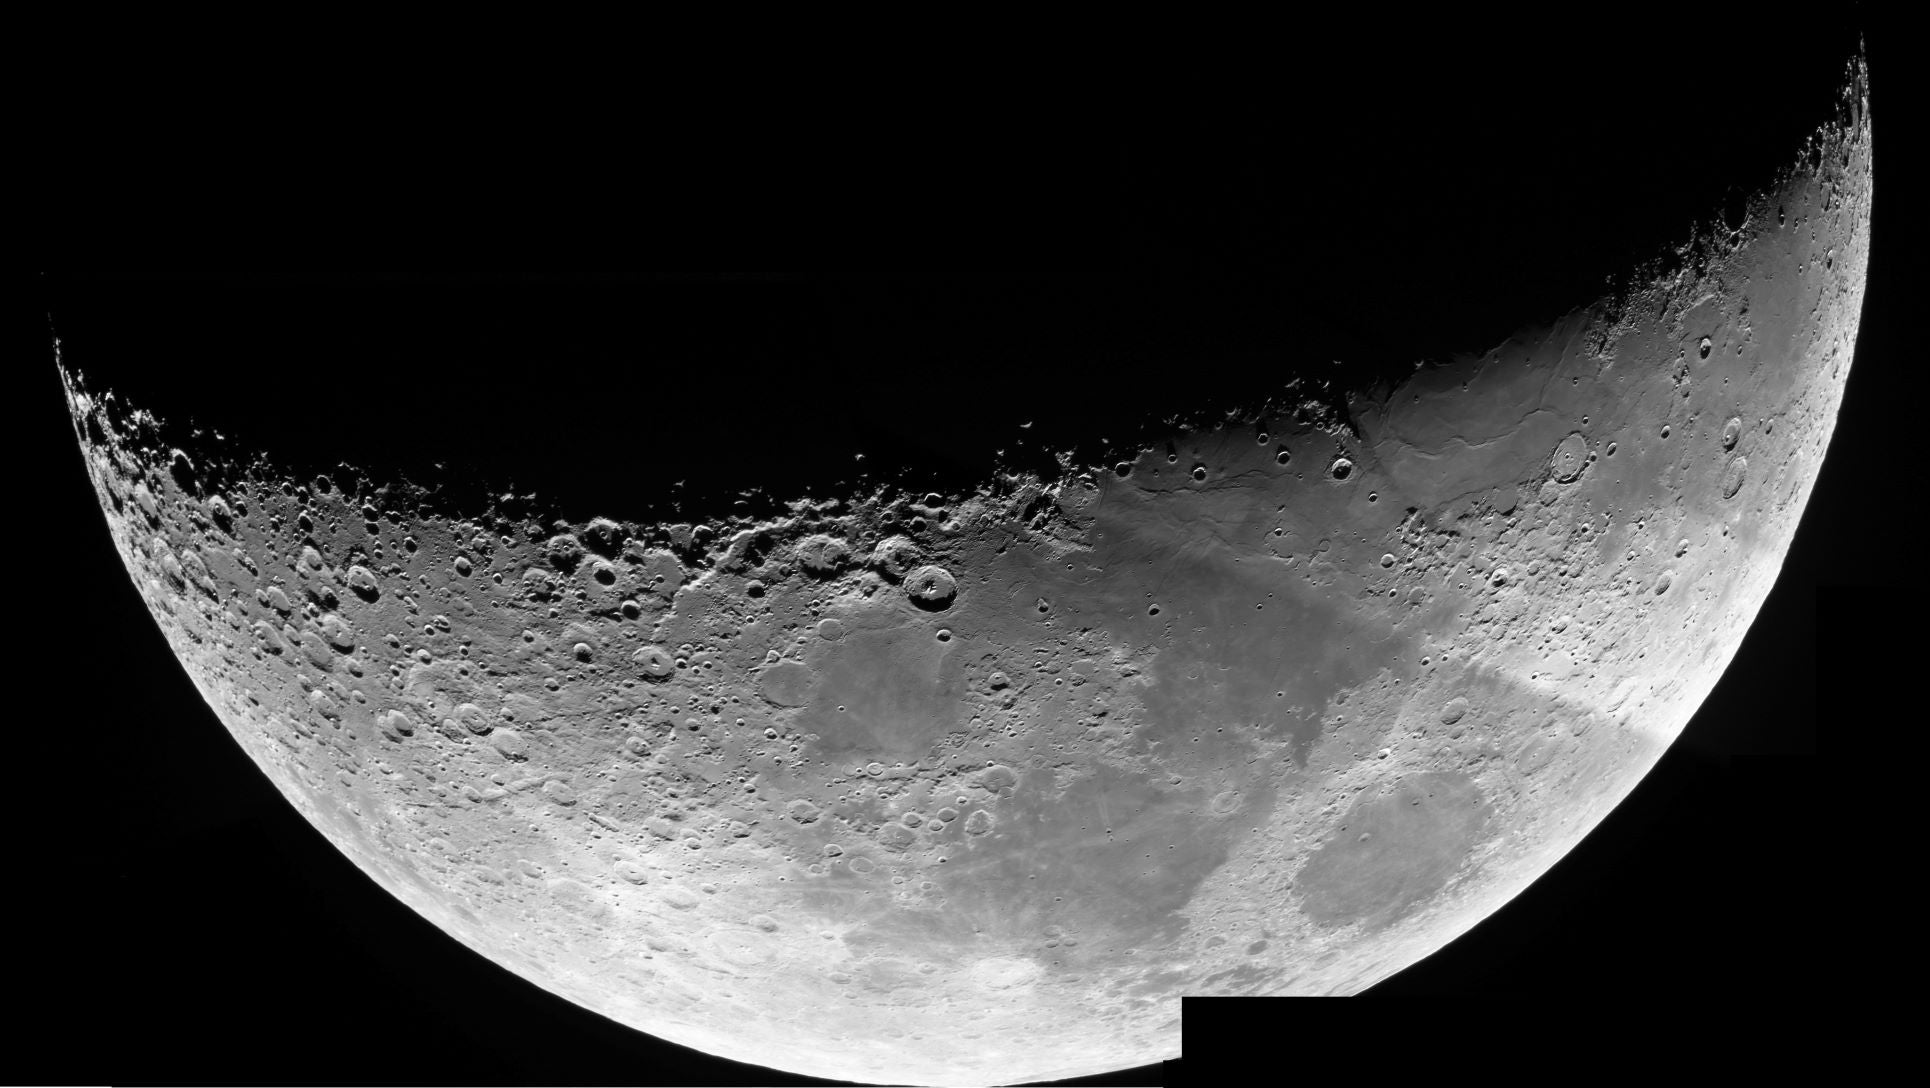 High-resolution lunar panorama composed of 6 video stacks